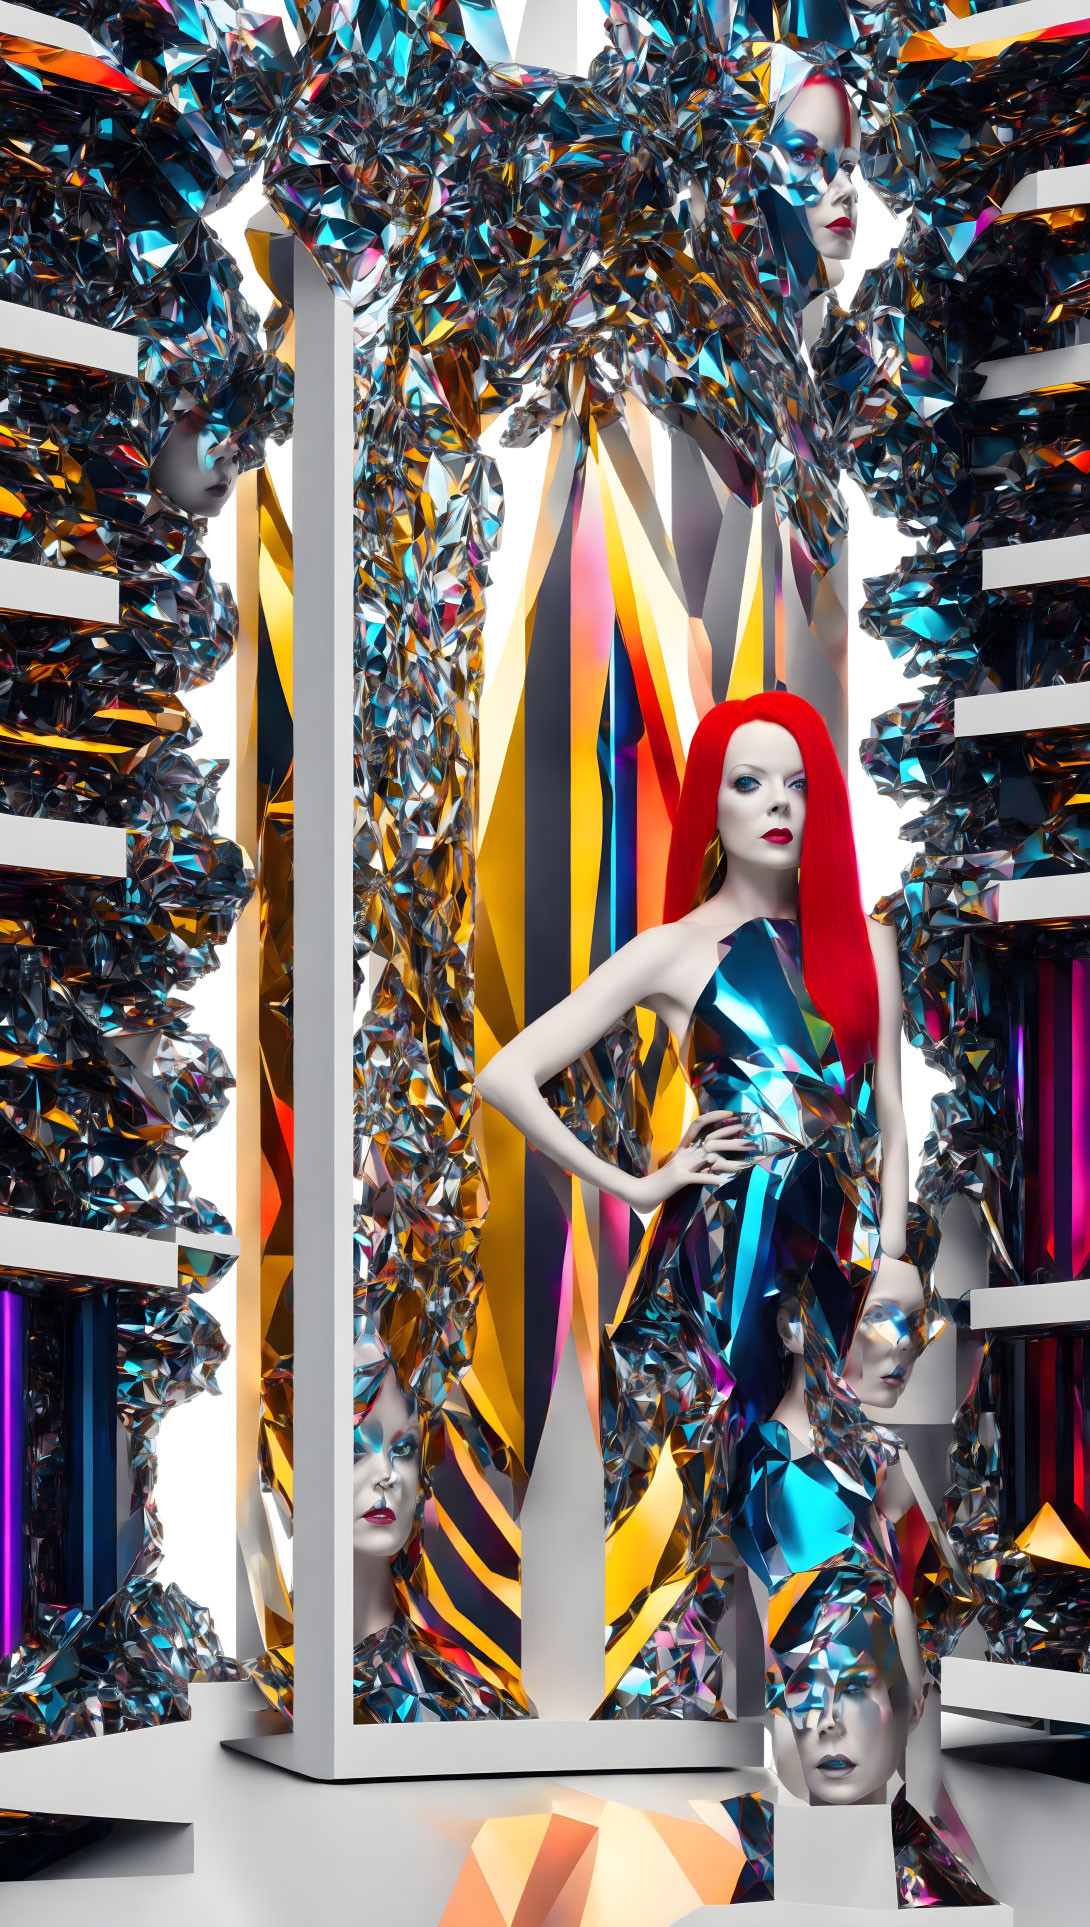 Red-haired woman posing among reflective sculptures in room with geometric patterns